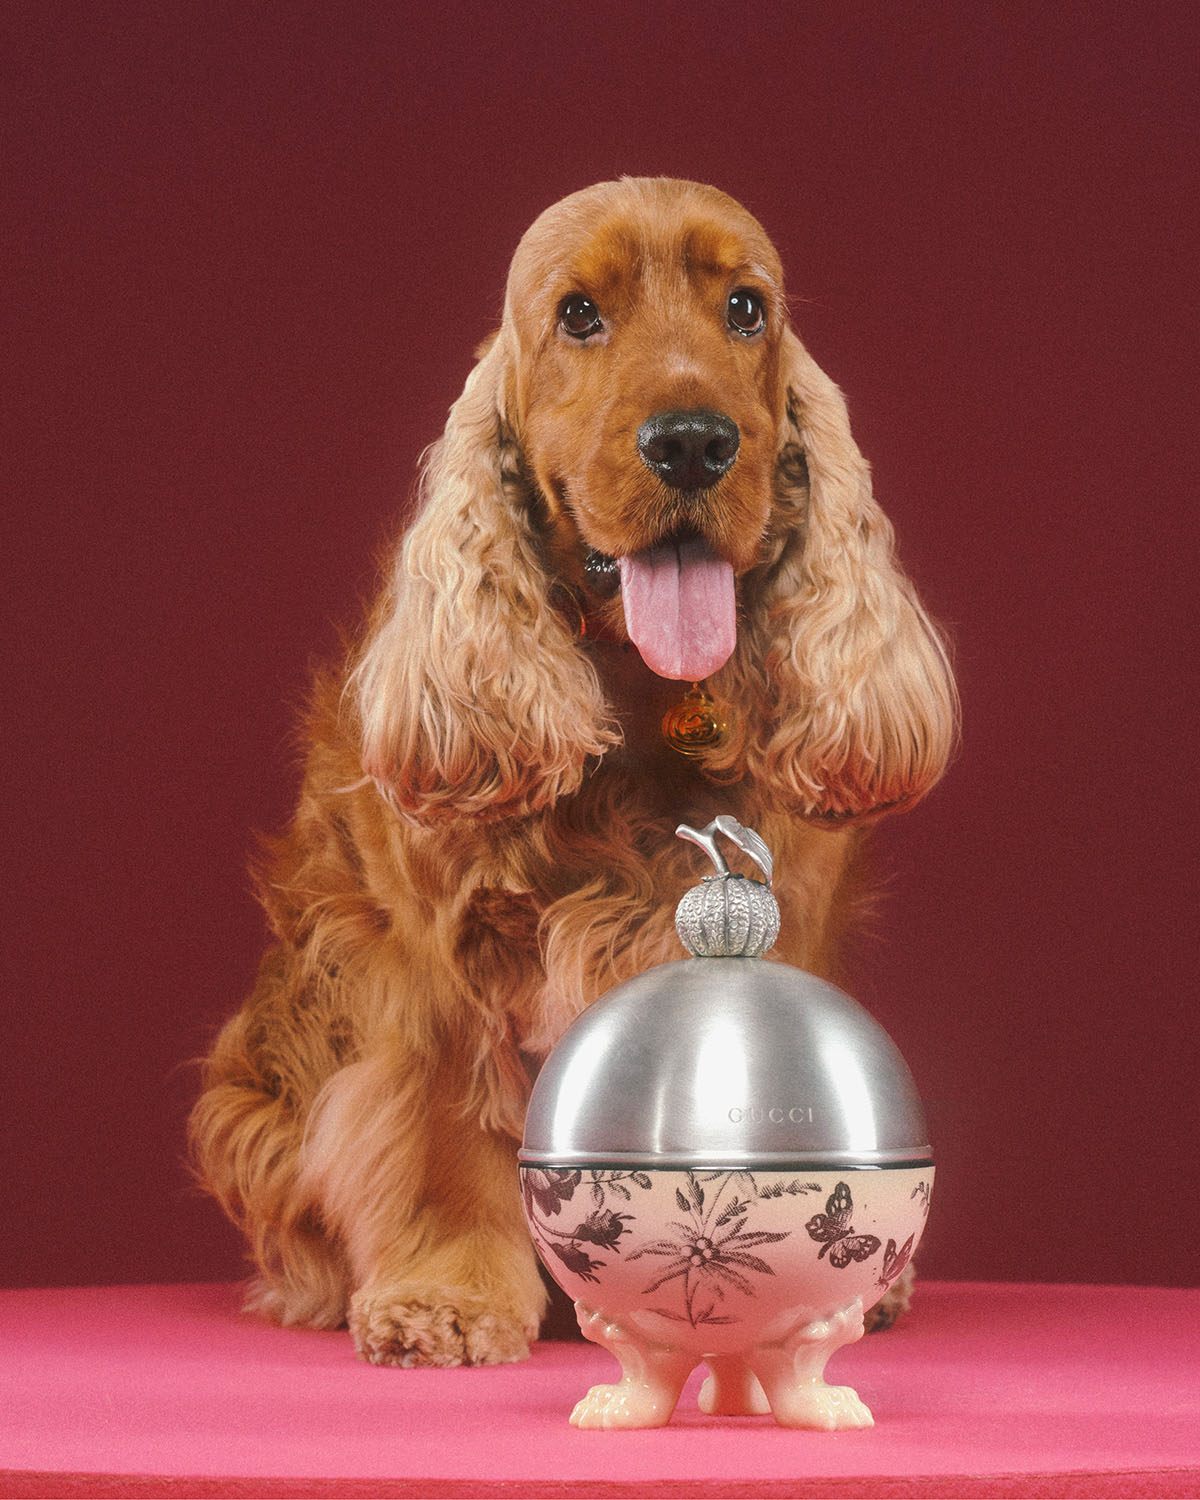 Gucci Launches First Pet Collection of Collars, Leashes, Beds and